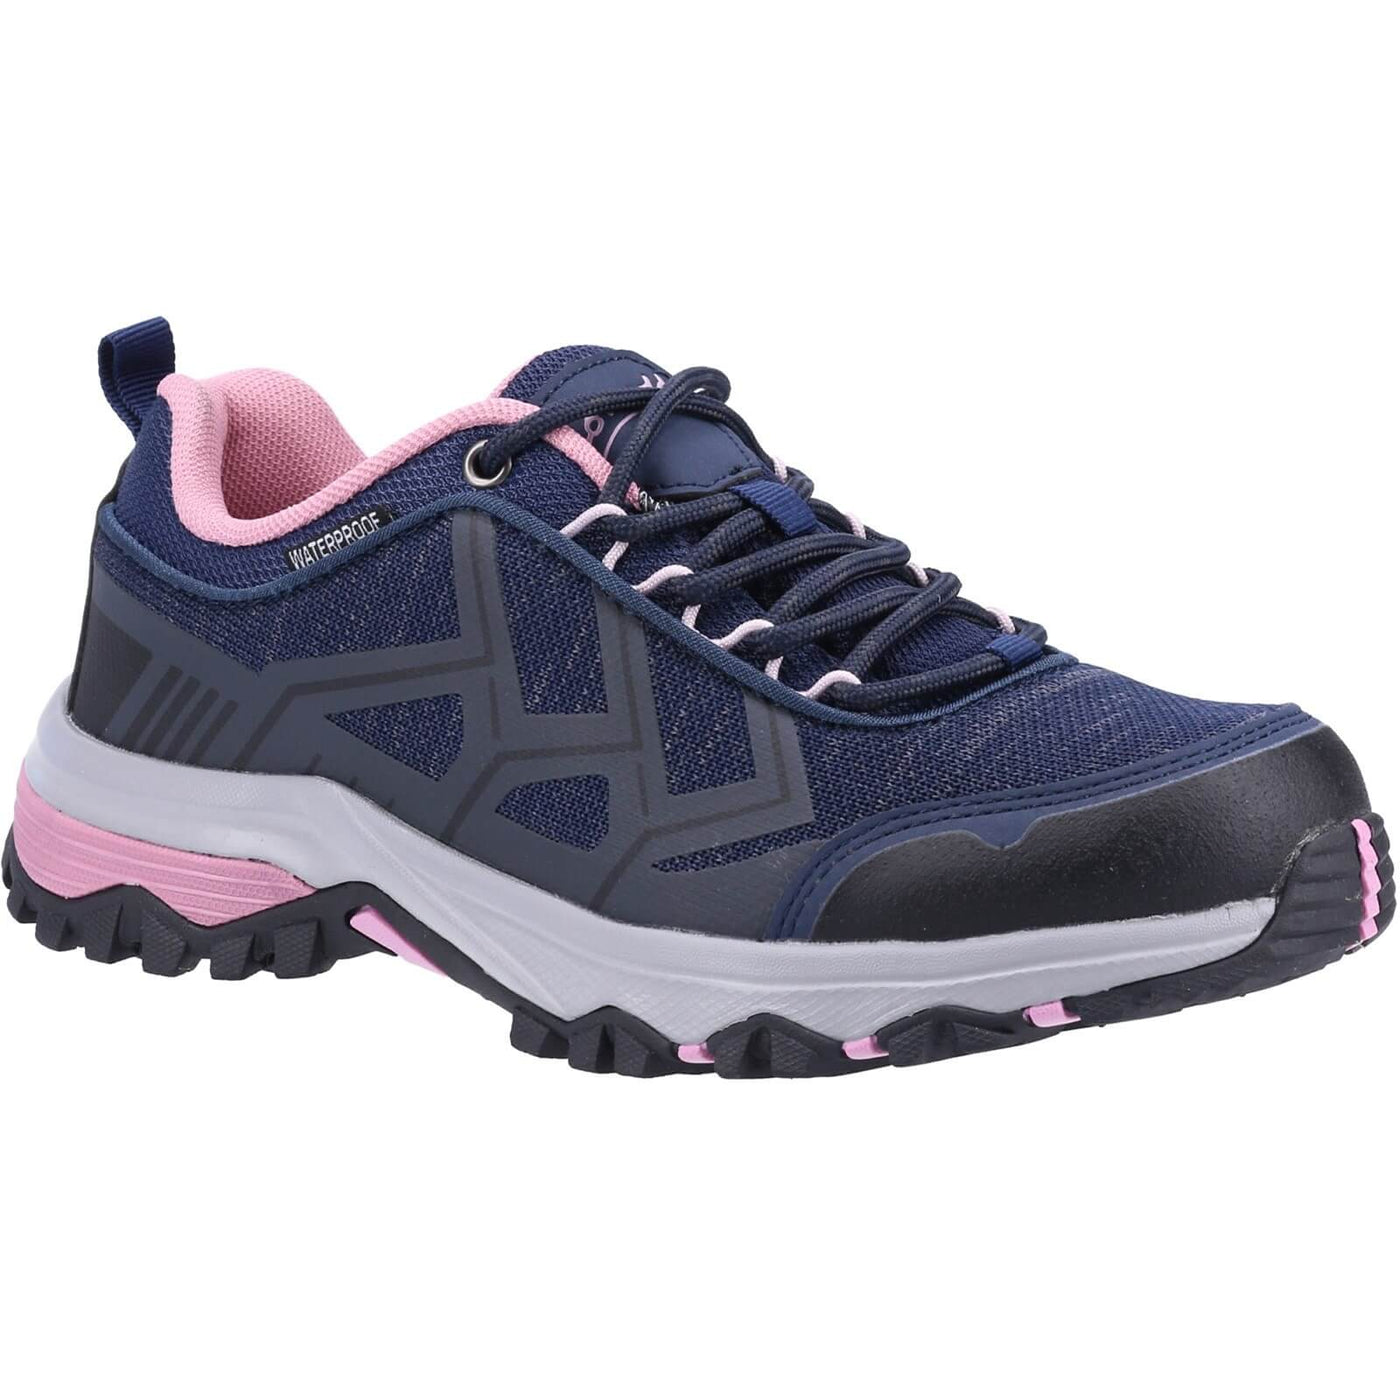 Cotswold Wychwood Low Waterproof Walking Shoes Navy/Pink 1#colour_navy-blue-pink